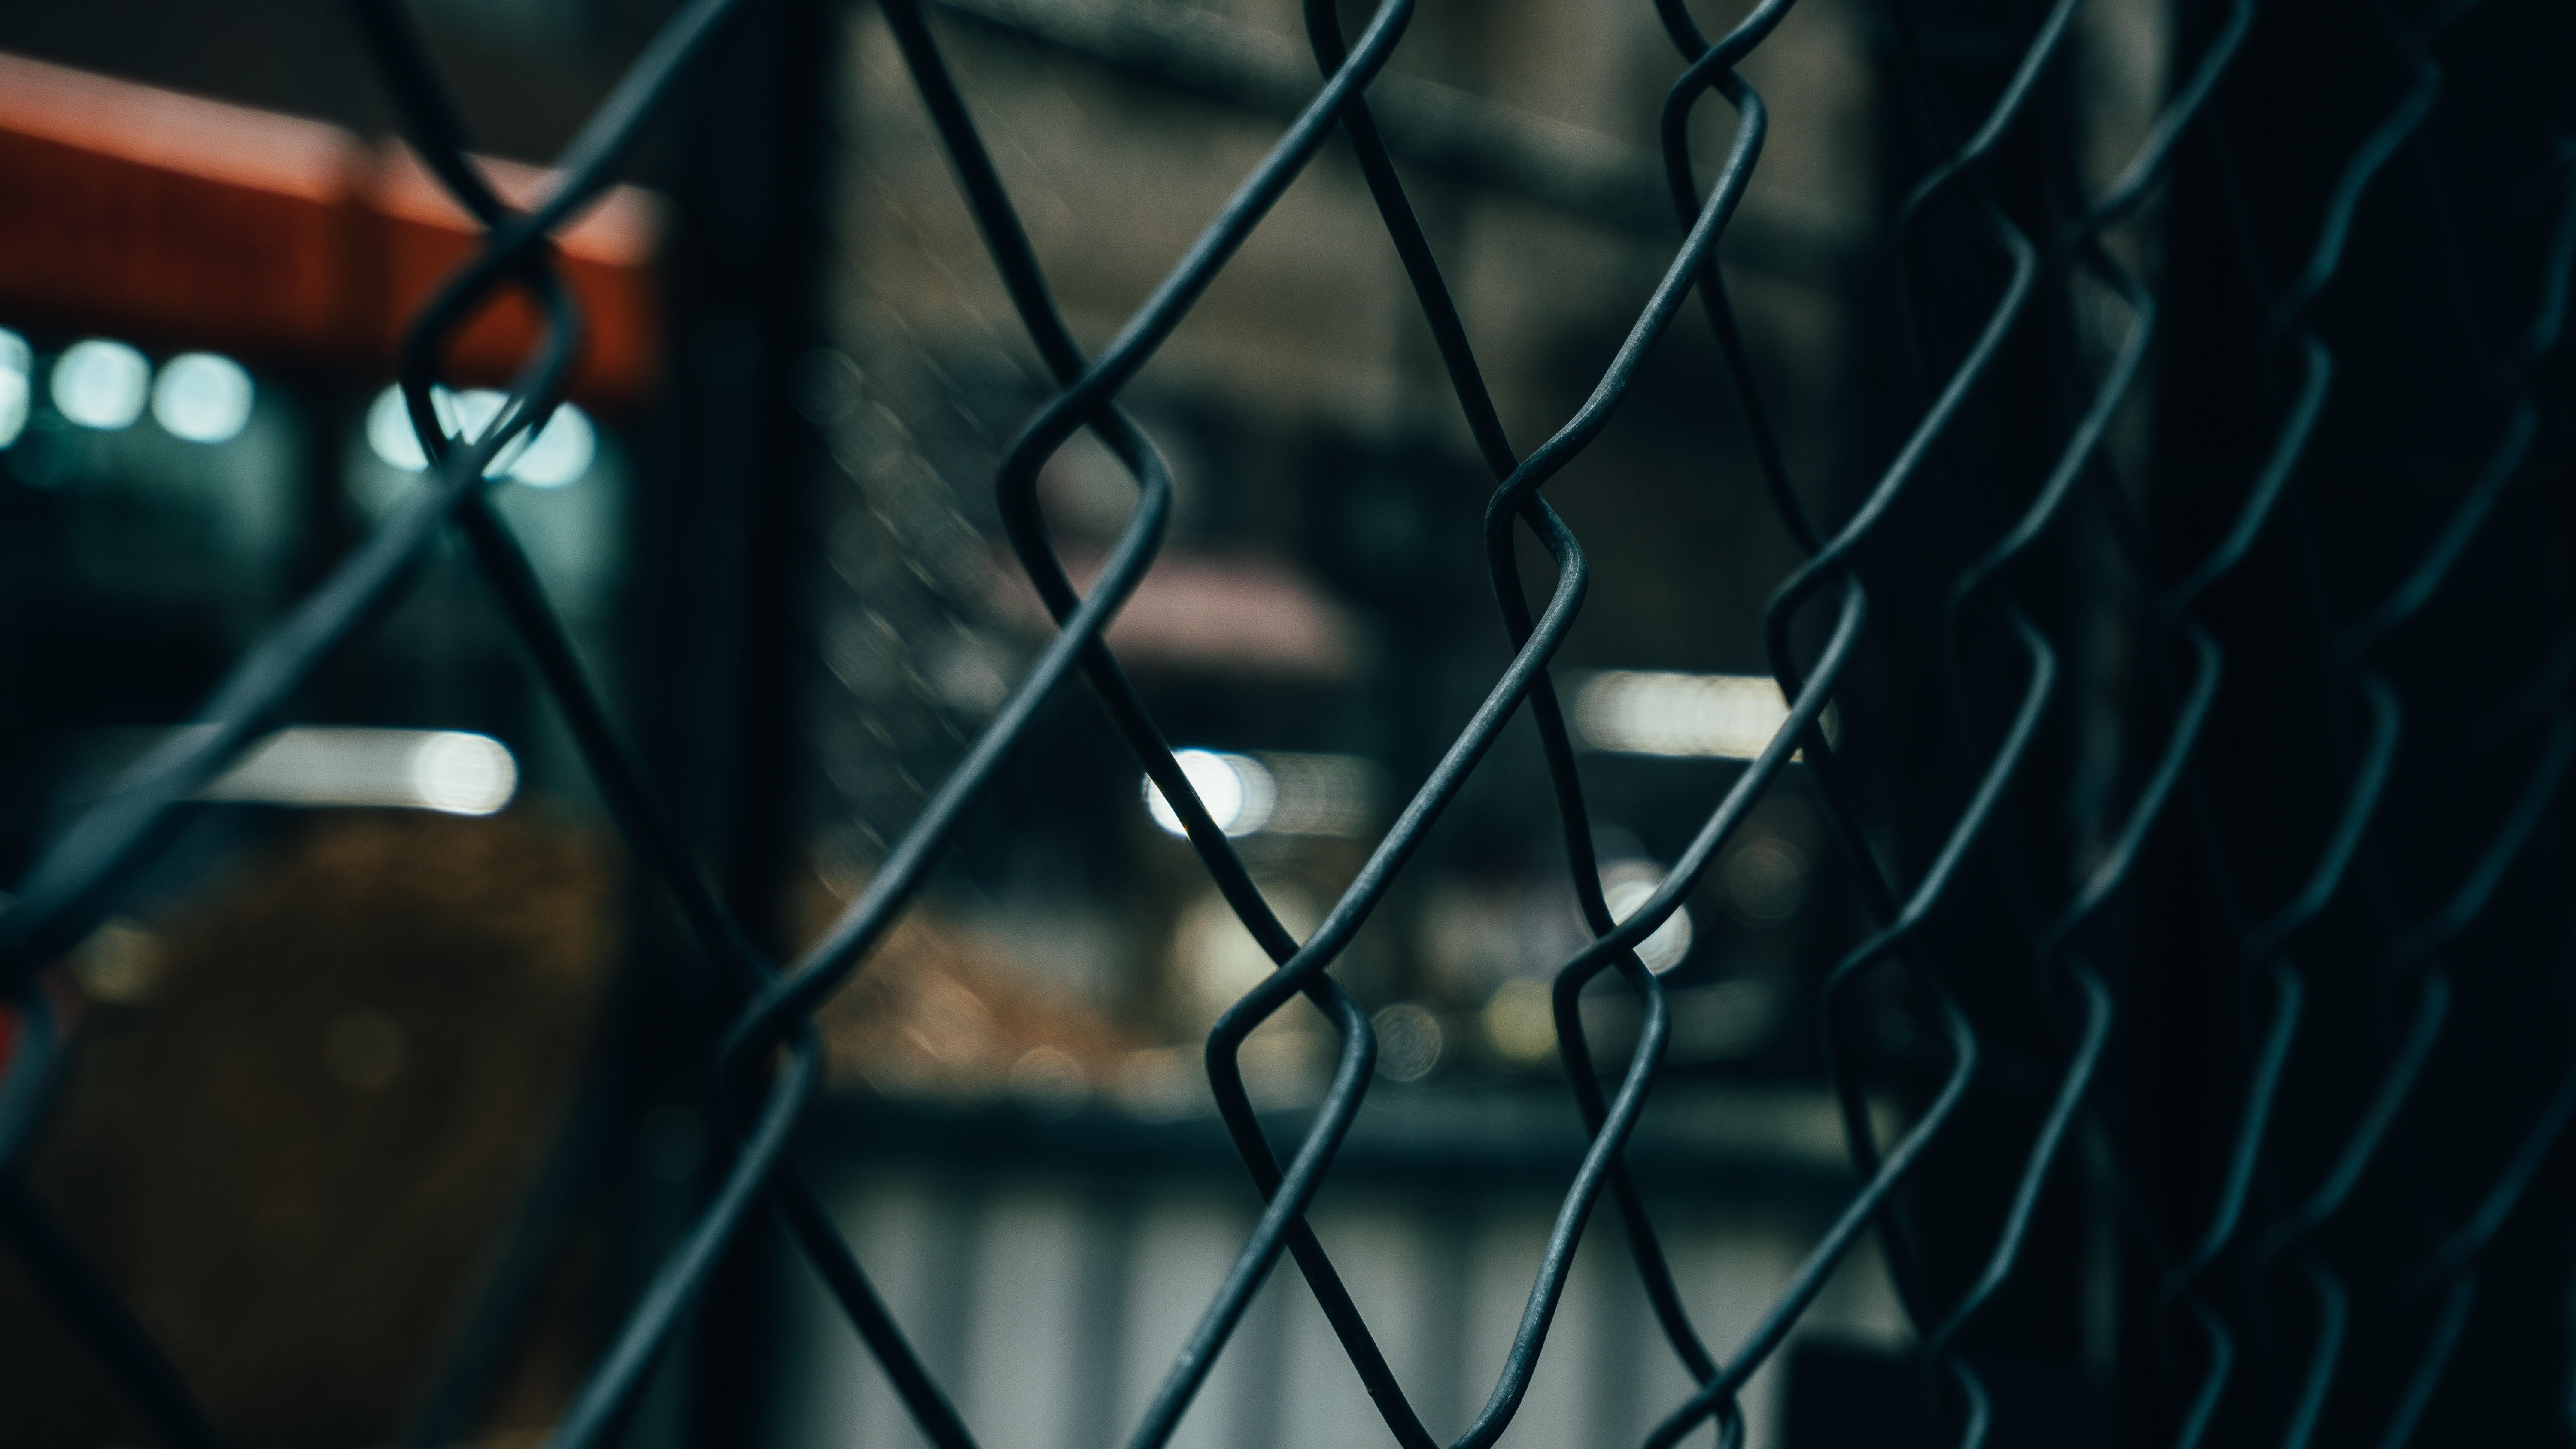 fence, miscellanea, miscellaneous, blur, smooth, metal grill, grille Full HD